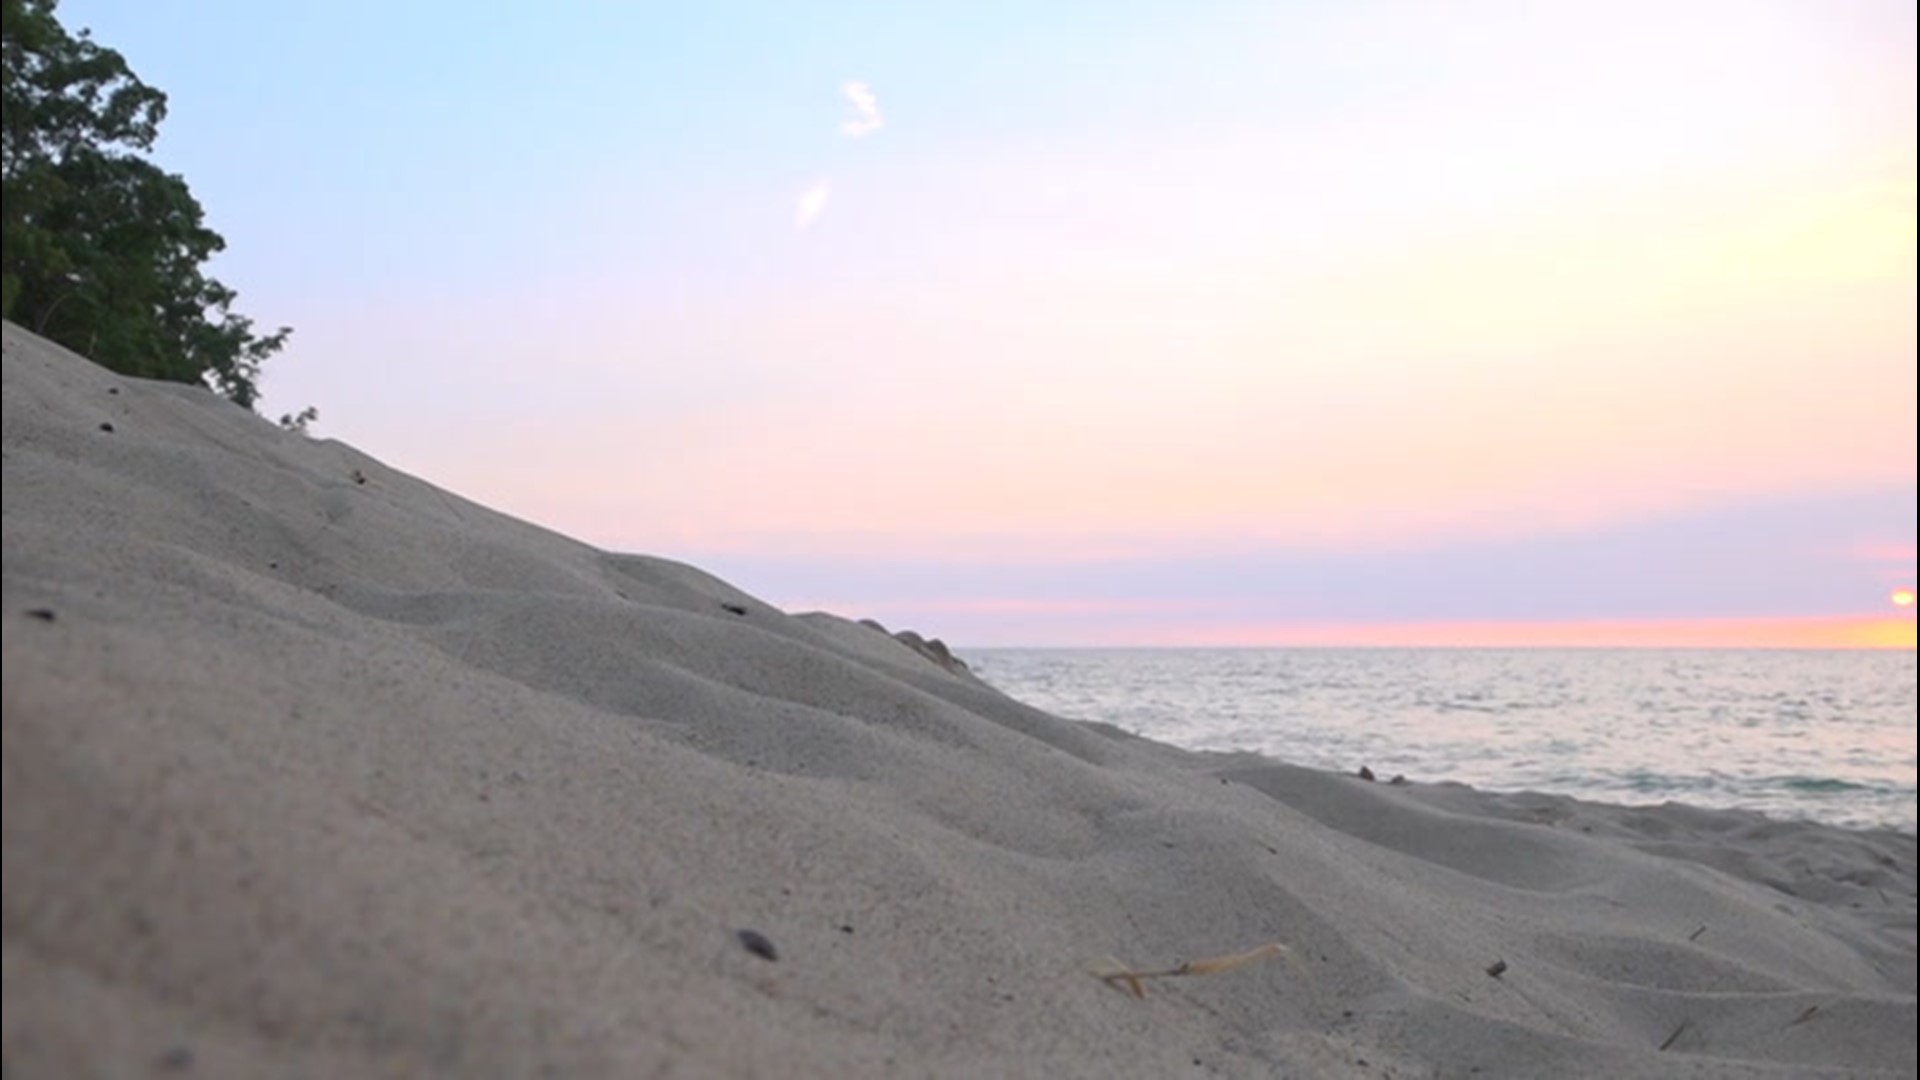 Located along Lake Michigan, Indiana Dunes National Park is home to 15 miles of shorelines and dunes. AccuWeather's Lincoln Riddle has more on what makes this park special.